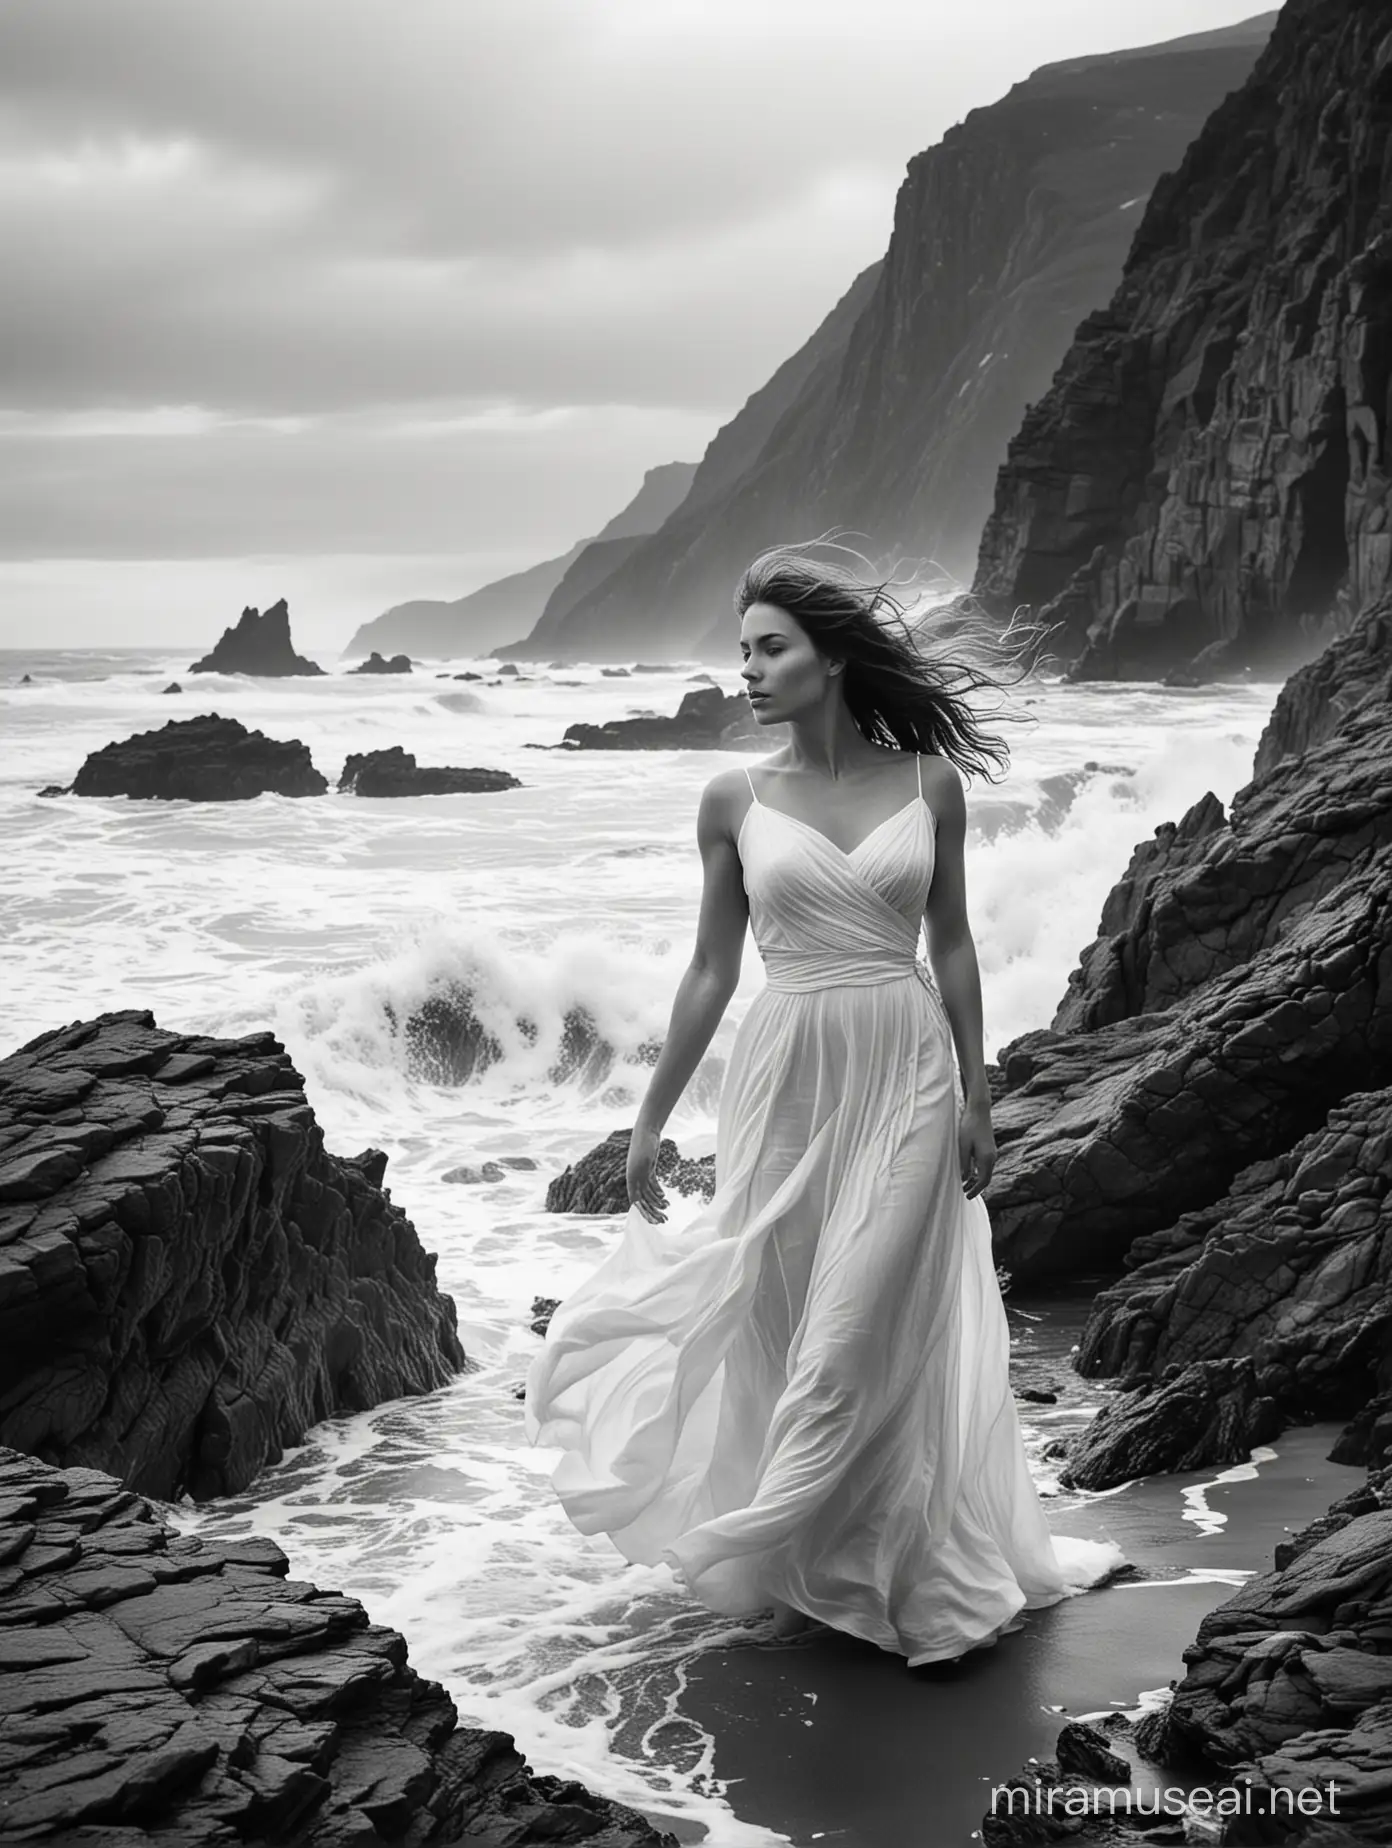 Ethereal Black and White Portrait of a Lady by the Windswept Coastline